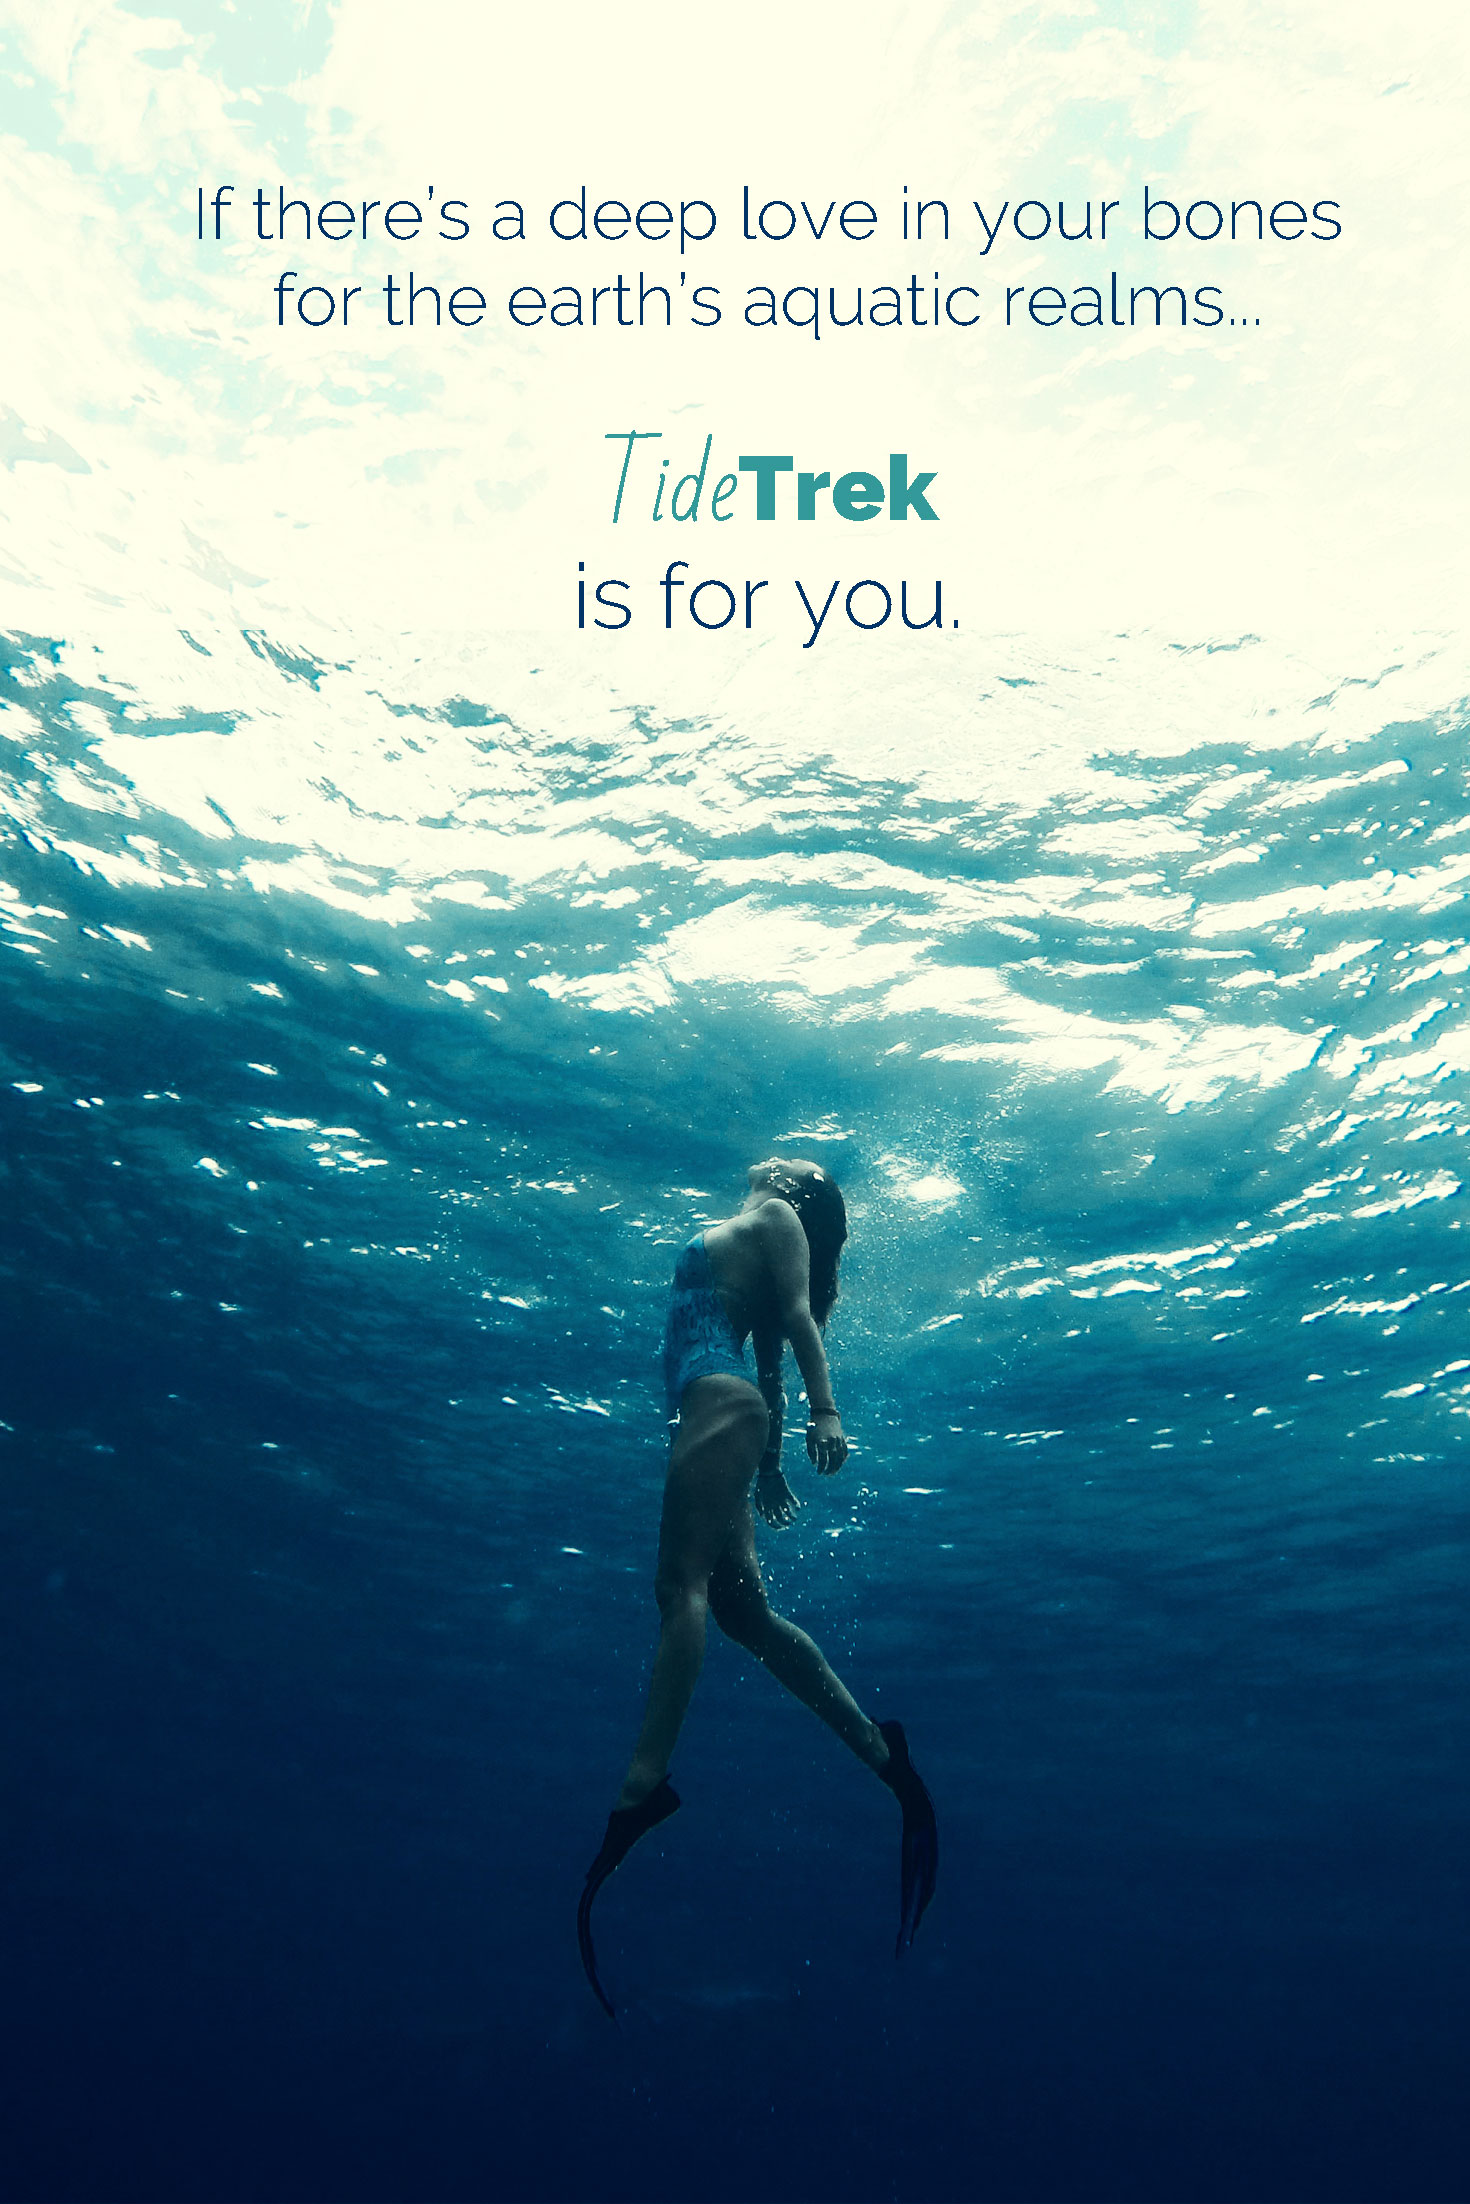 Photo of a woman underwater swimming towards the surface with overlaid text, "If there's a deep love in your bones for the earth's aquatic realms, Tide Trek is for you."